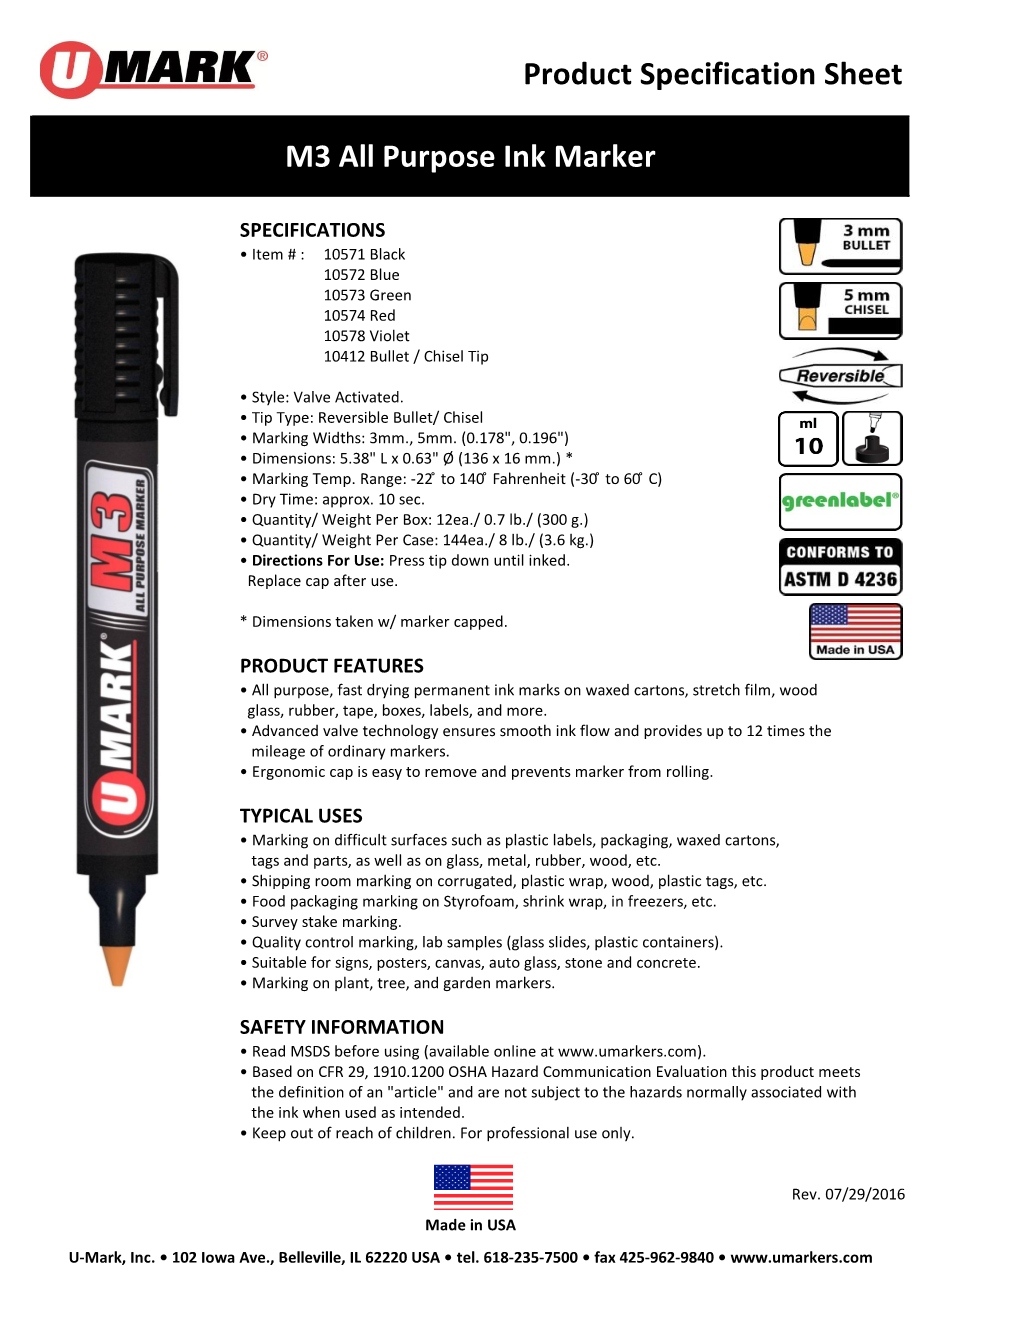 Product Specification Sheet M3 All Purpose Ink Marker